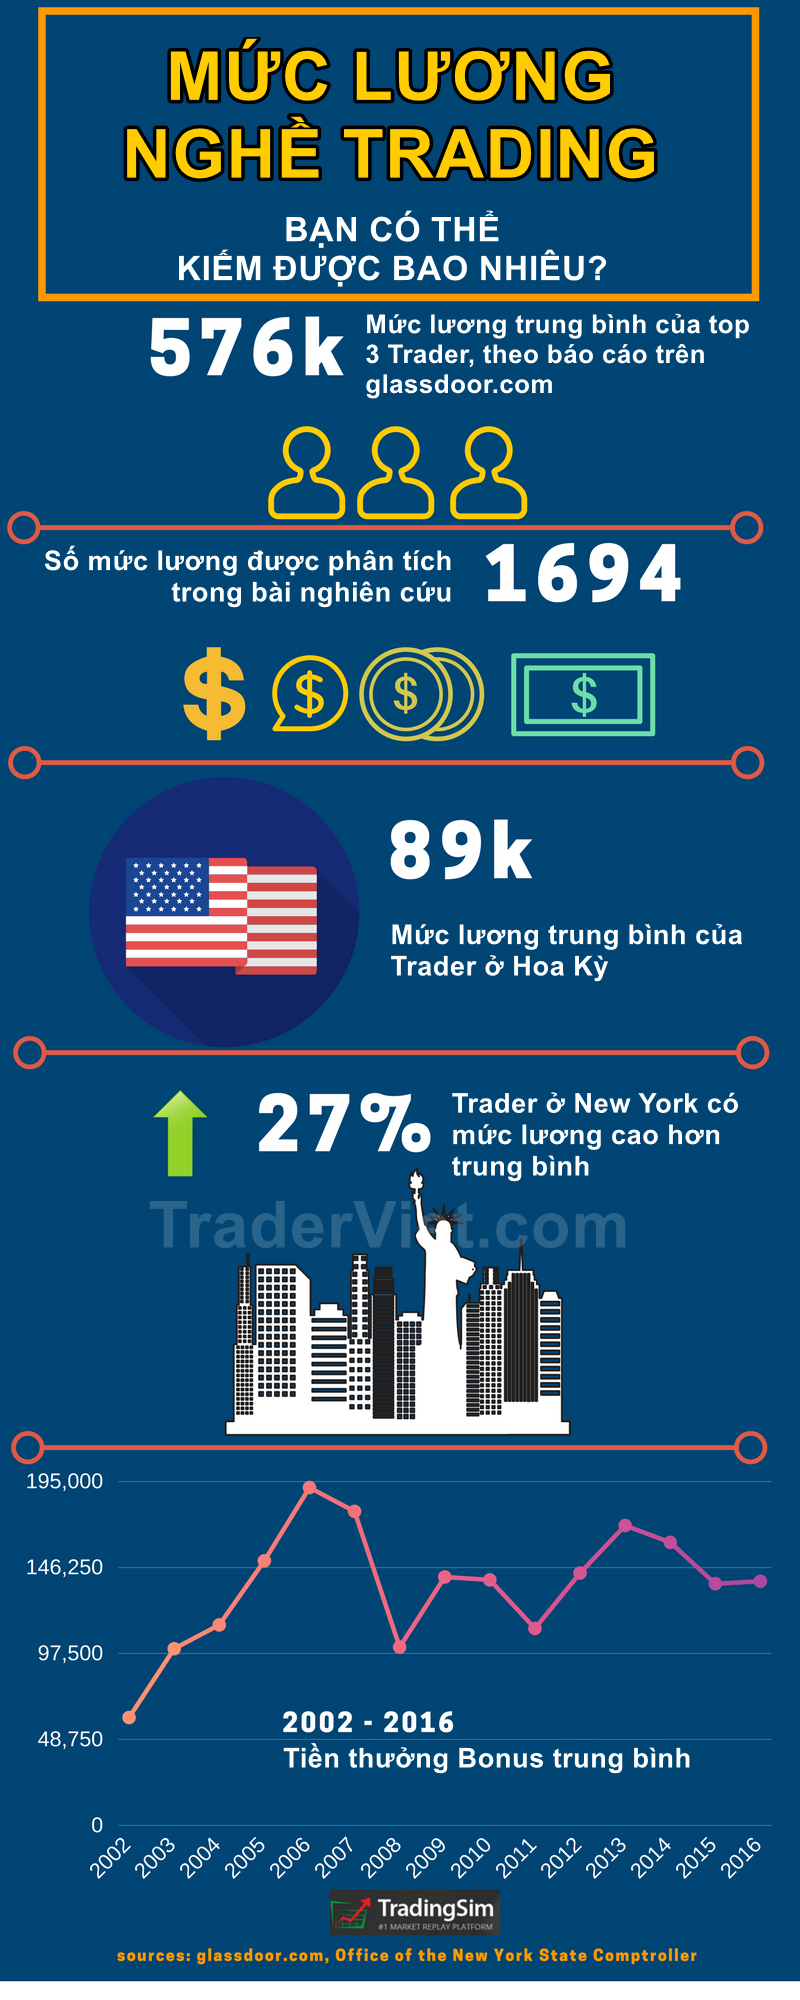 Luong-cua-nghe-Day-trading-TraderViet1.png